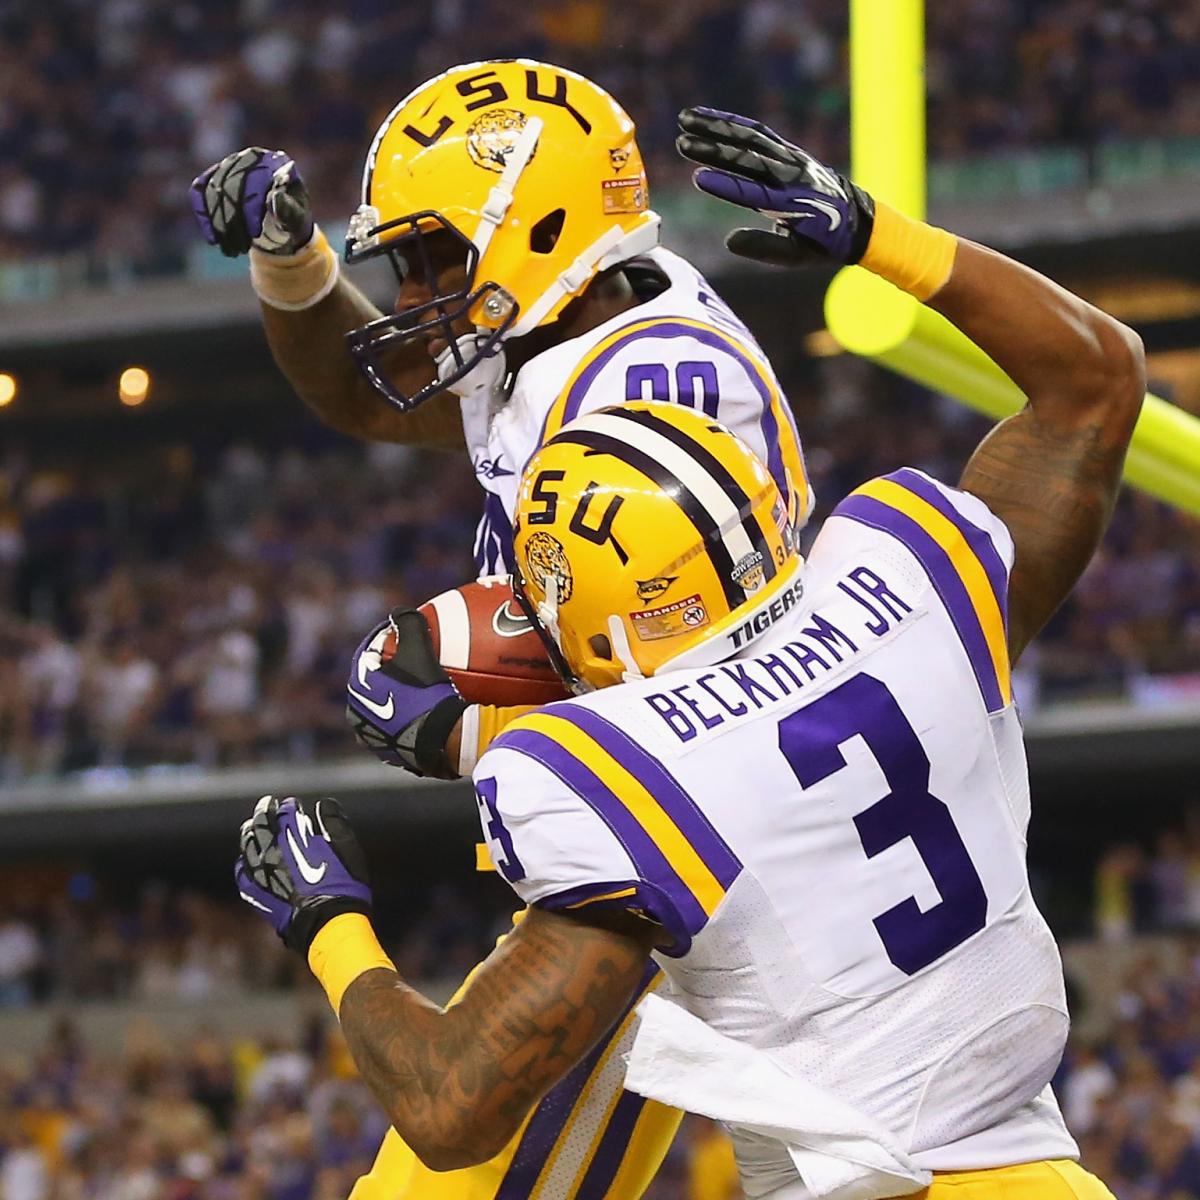 2014 NFL Draft: Evaluating LSU Wide Receivers Odell Beckham and